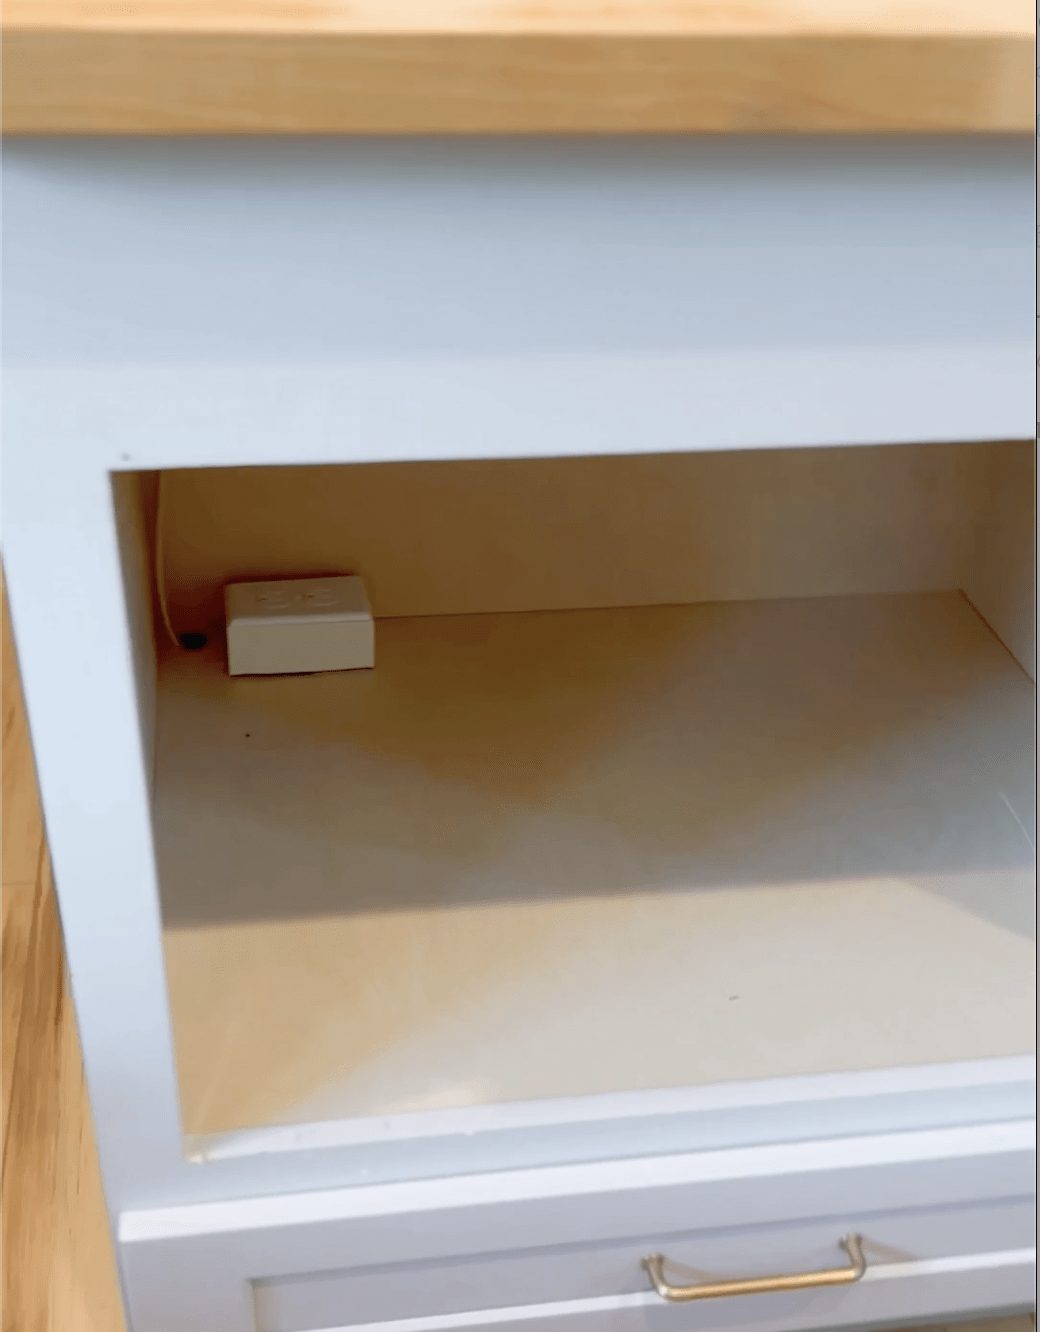 Microwave outlet inside cabinet opening